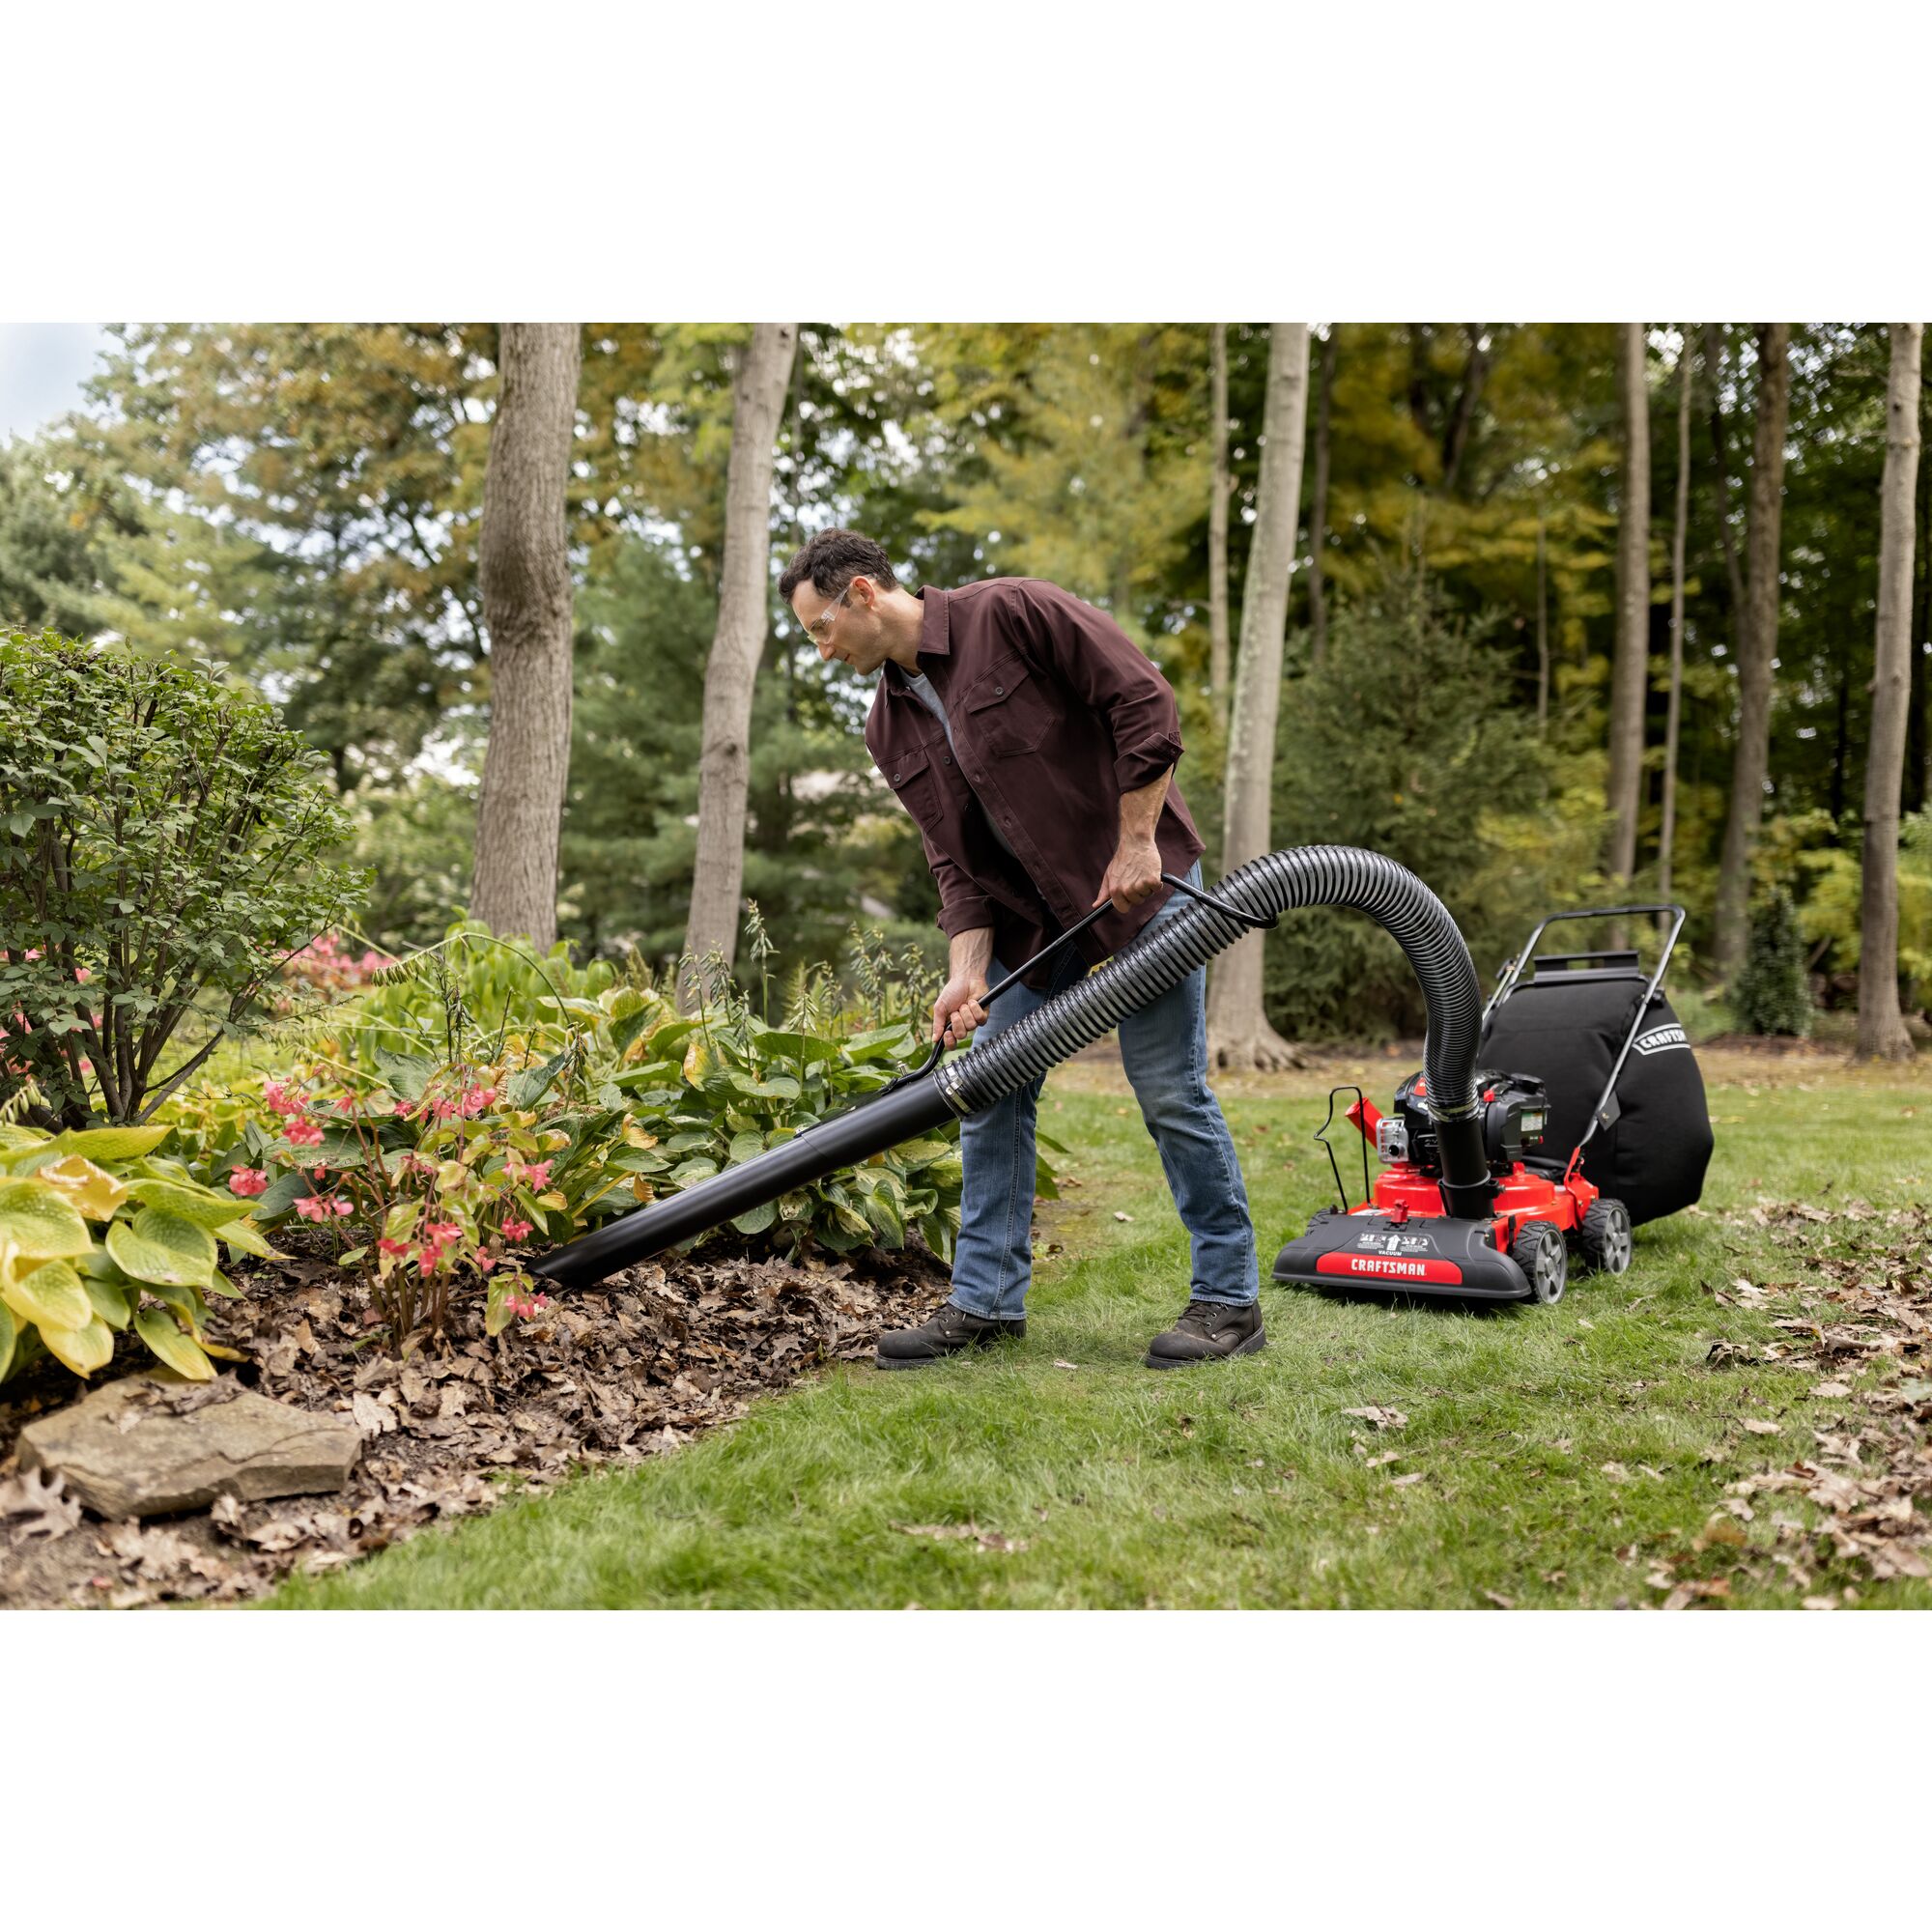 CRAFTSMAN 24-In. 163cc Chipper Shredder Vacuum attached to mower using hand vacuum removing leaves in flowerbed